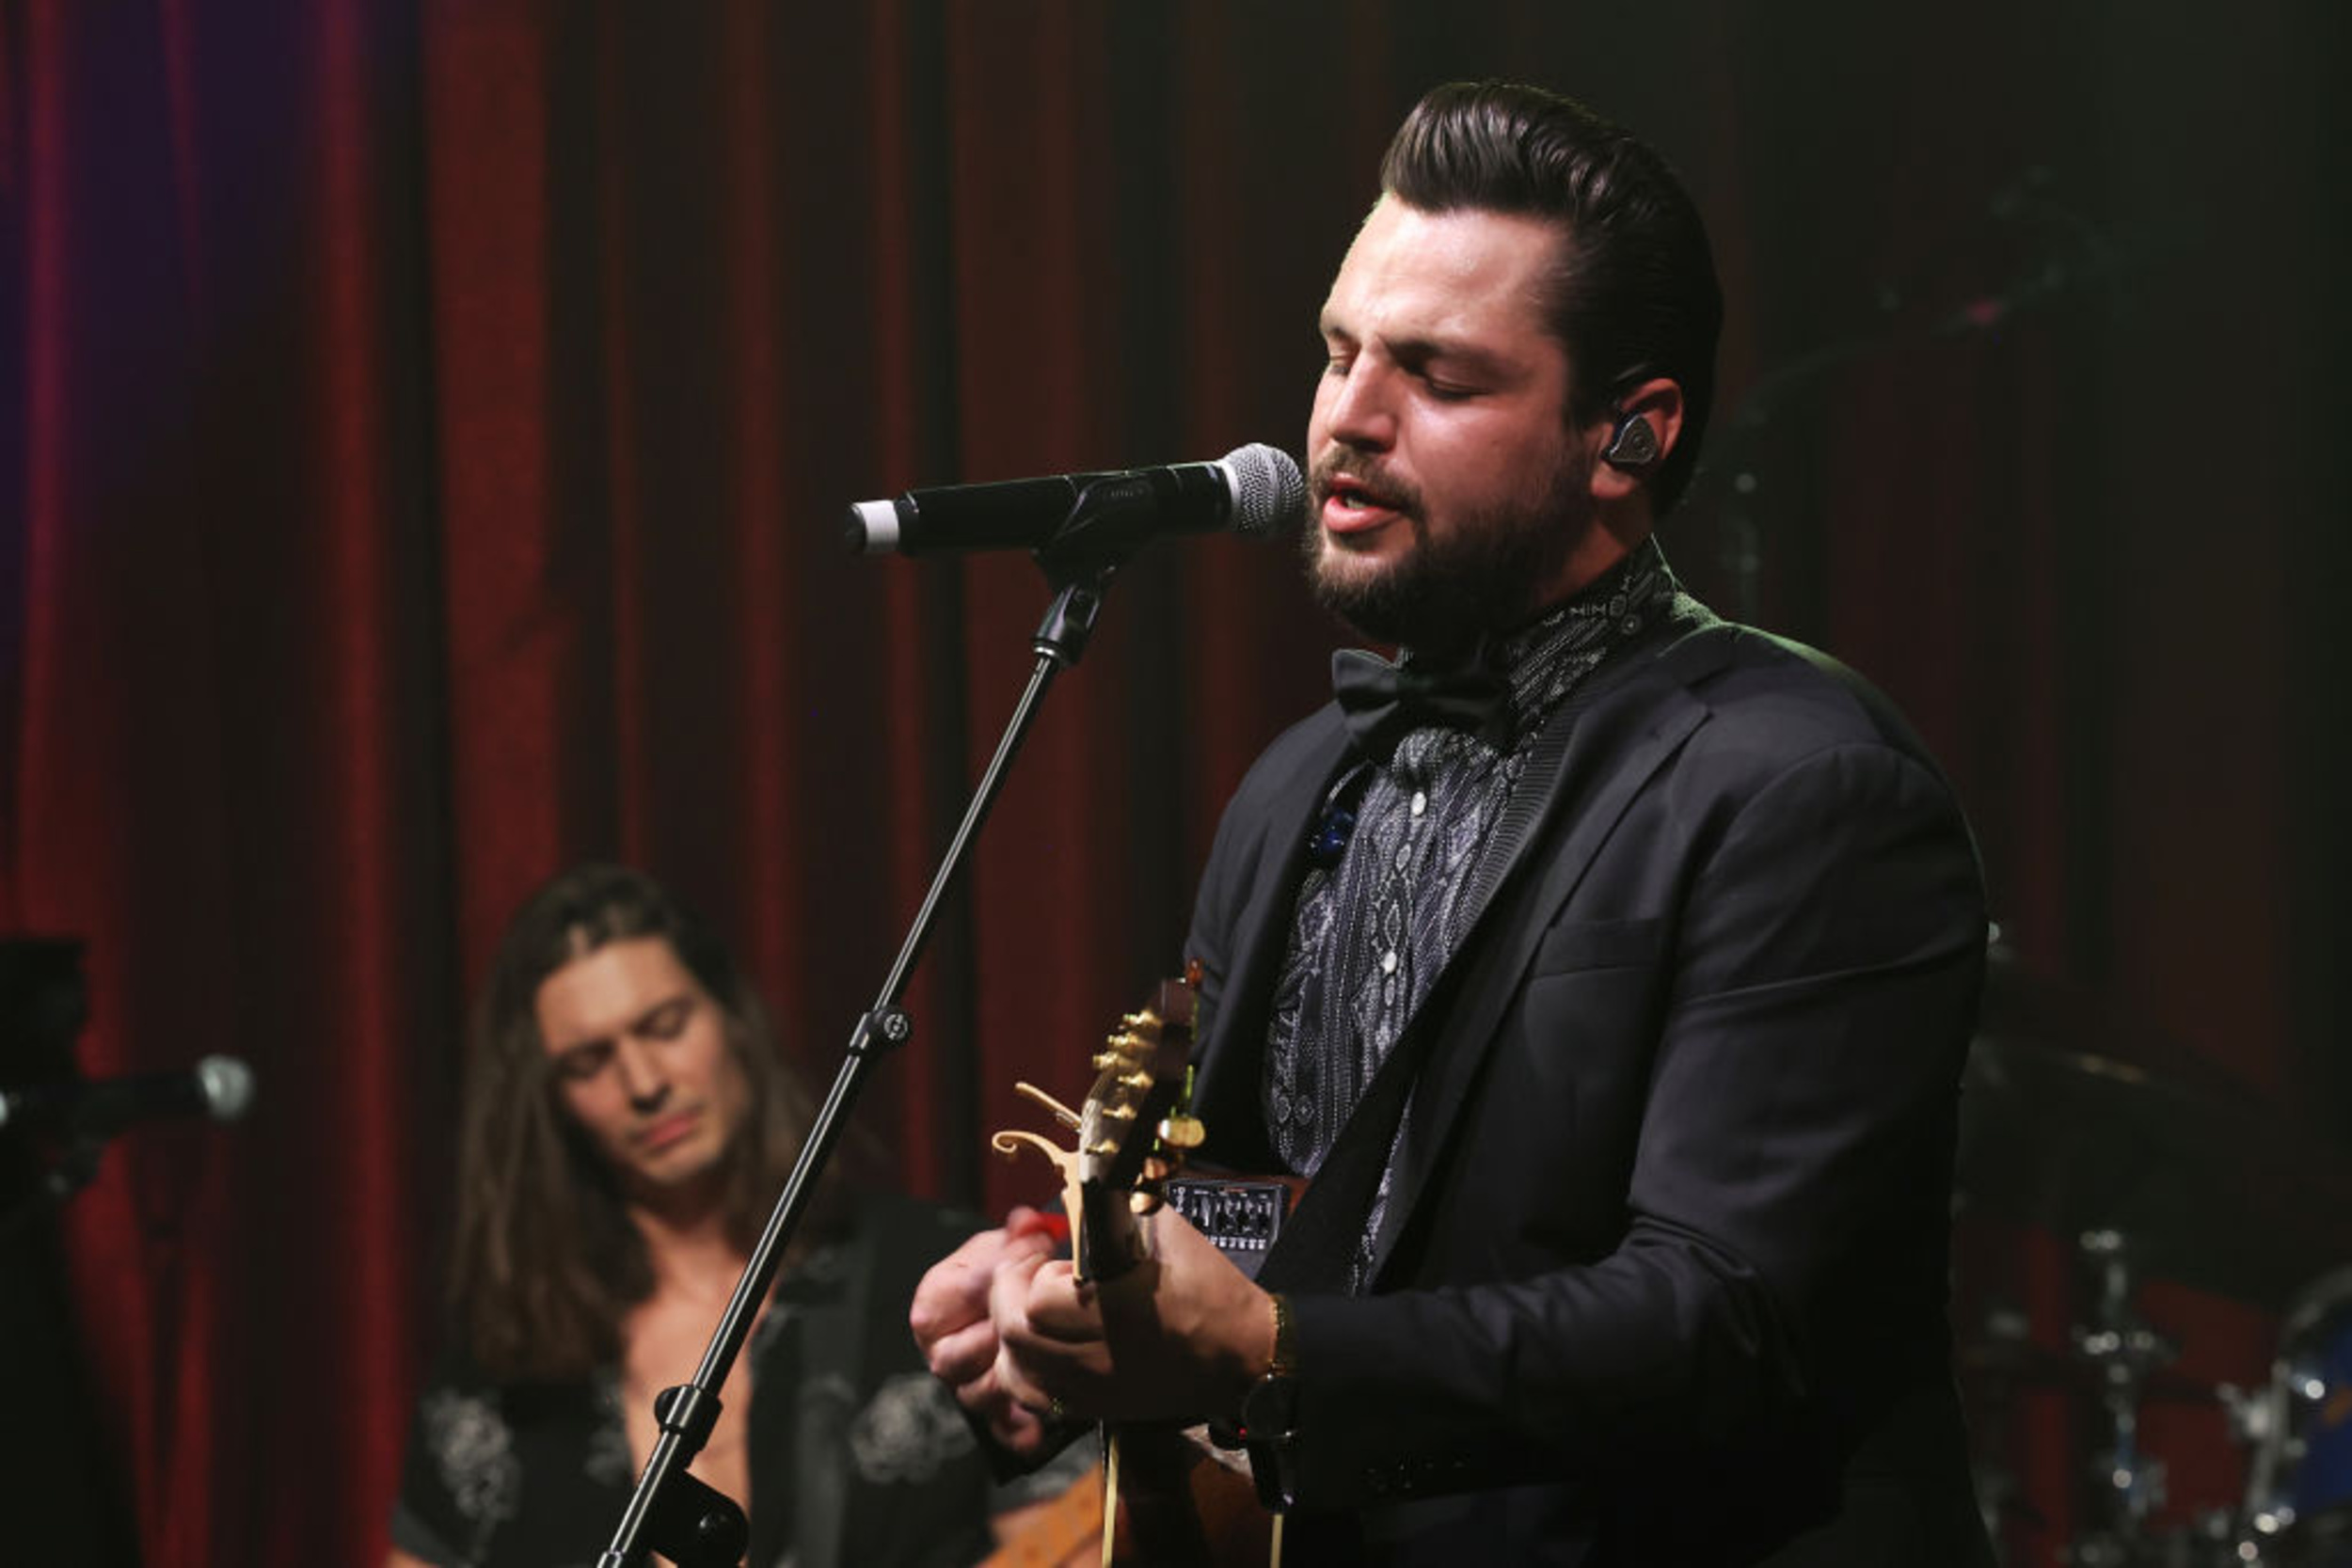 <p>The winner of the nineteenth season of "American Idol," Chayce Beckham has already scored a Platinum hit with 2021's "23," but he's not stopping there. In 2023, Beckham returned with a great new single, "Til The Day I Die," and he's headed out on tour with Luke Bryan in 2024. </p><p>You may also like: <a href='https://www.yardbarker.com/entertainment/articles/20_actors_who_need_to_join_the_snl_five_timers_club_030824/s1__39987816'>20 actors who need to join the 'SNL' Five-Timers Club</a></p>